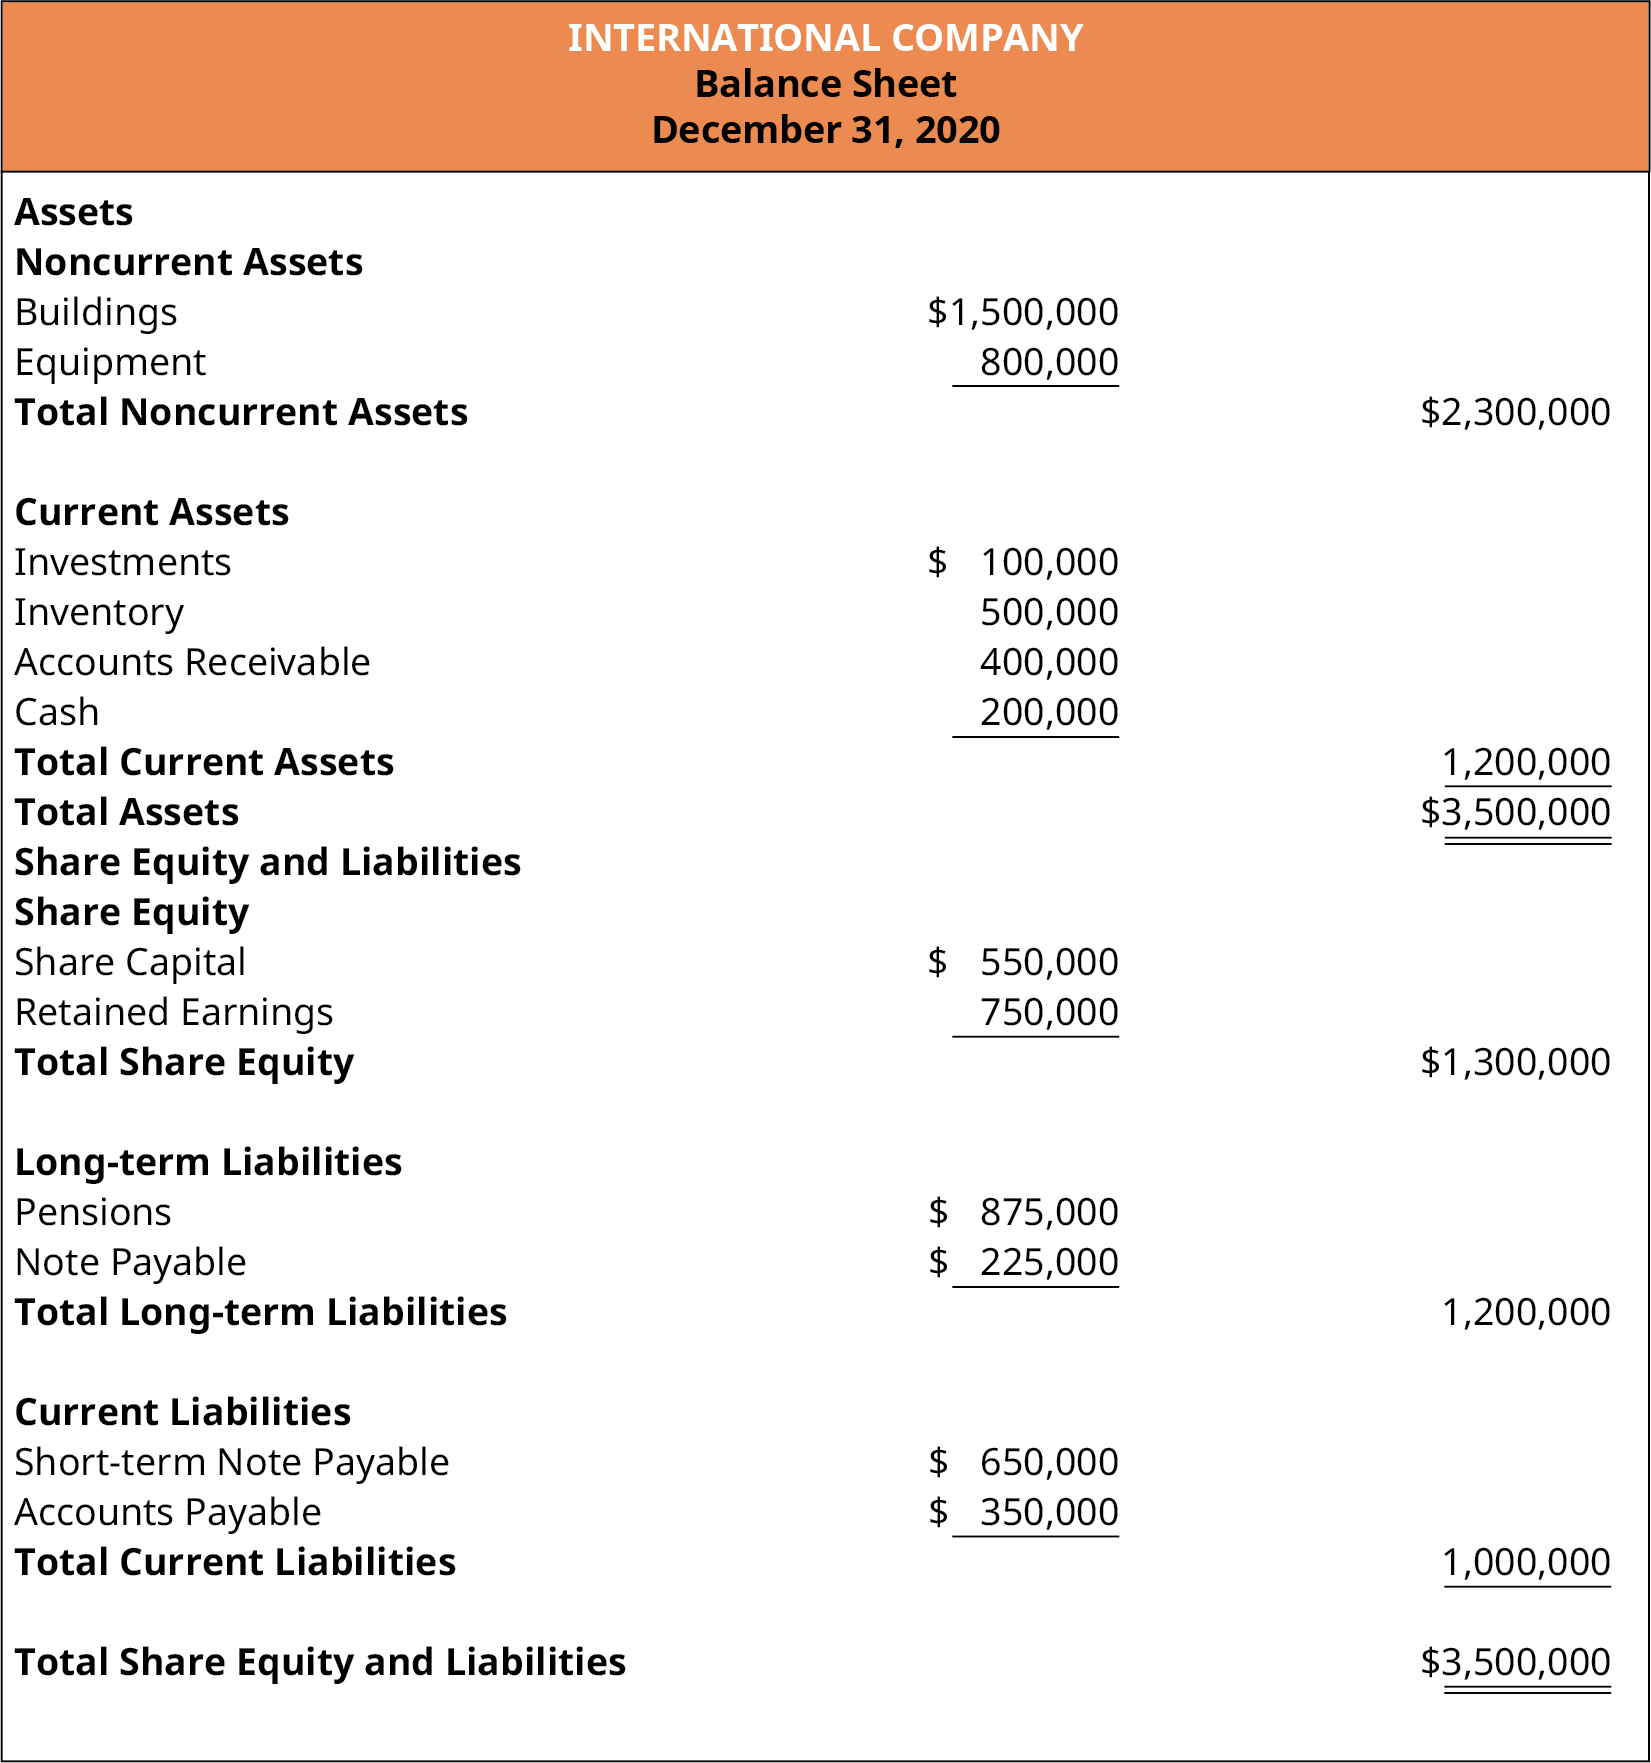 LO 4.5 Prepare Financial Statements Using the Adjusted Trial Balance